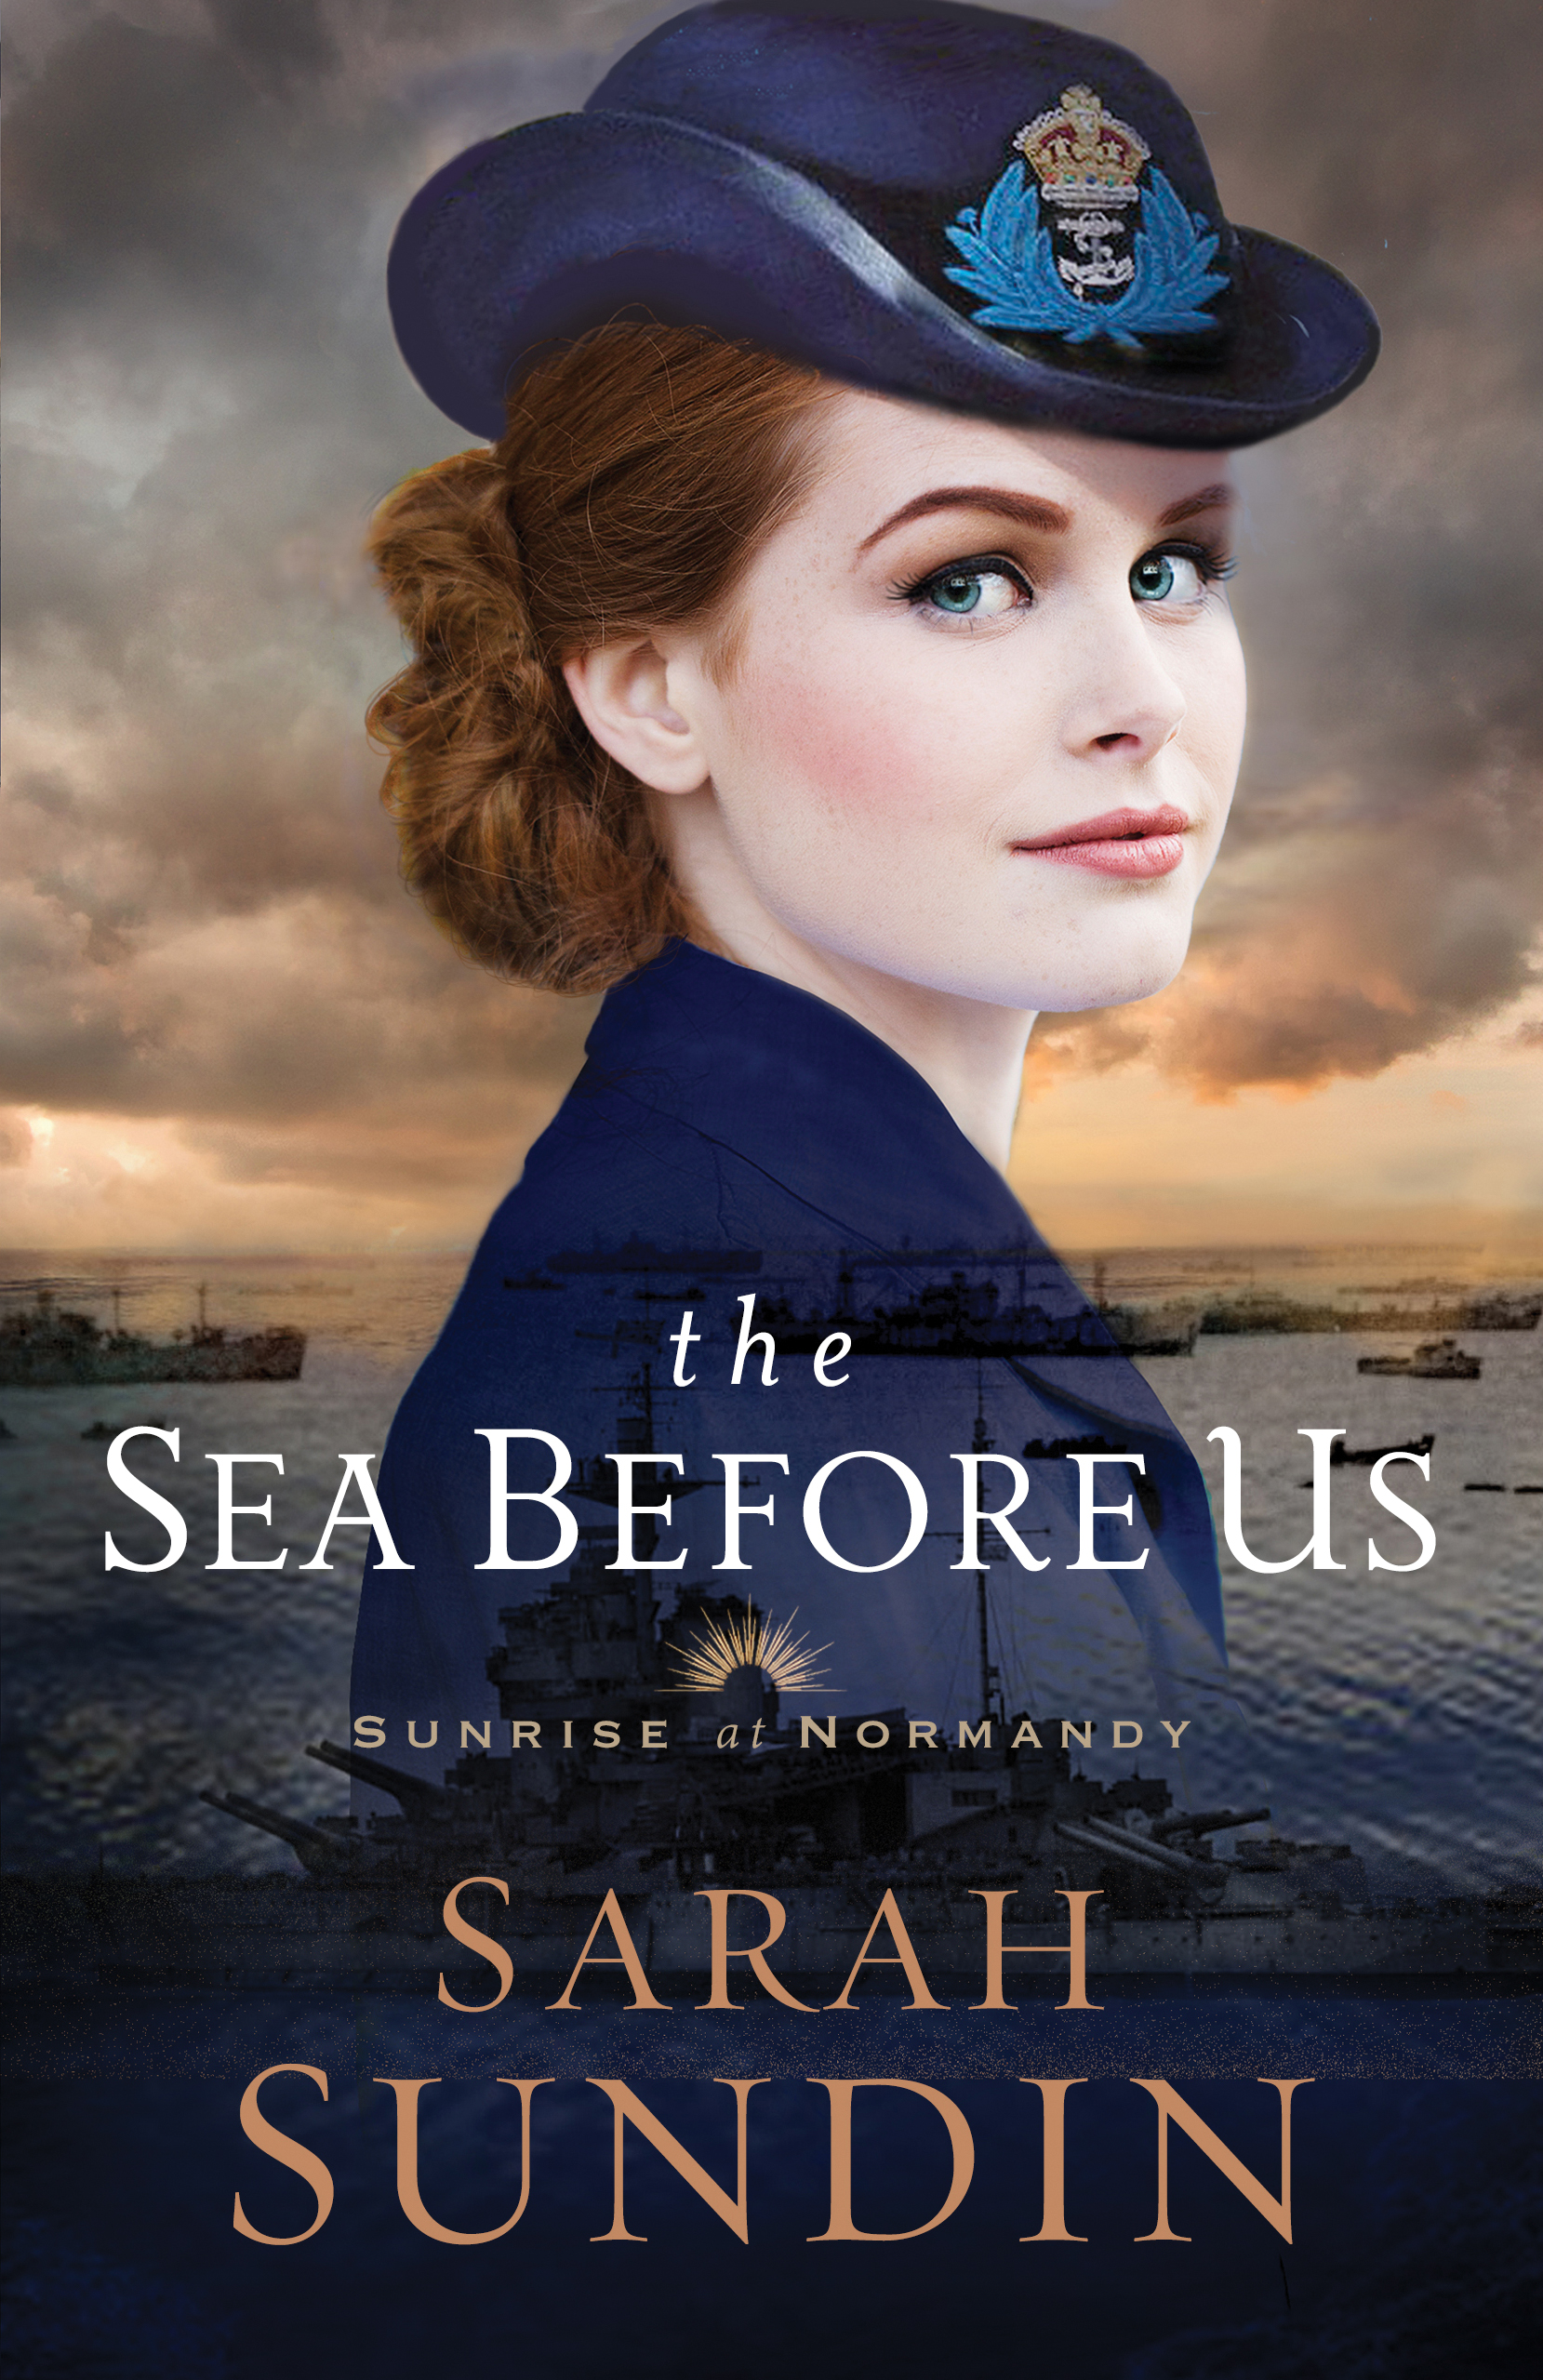 The Sea Before Us by Sarah Sundin, February 6, 2018 from Revell